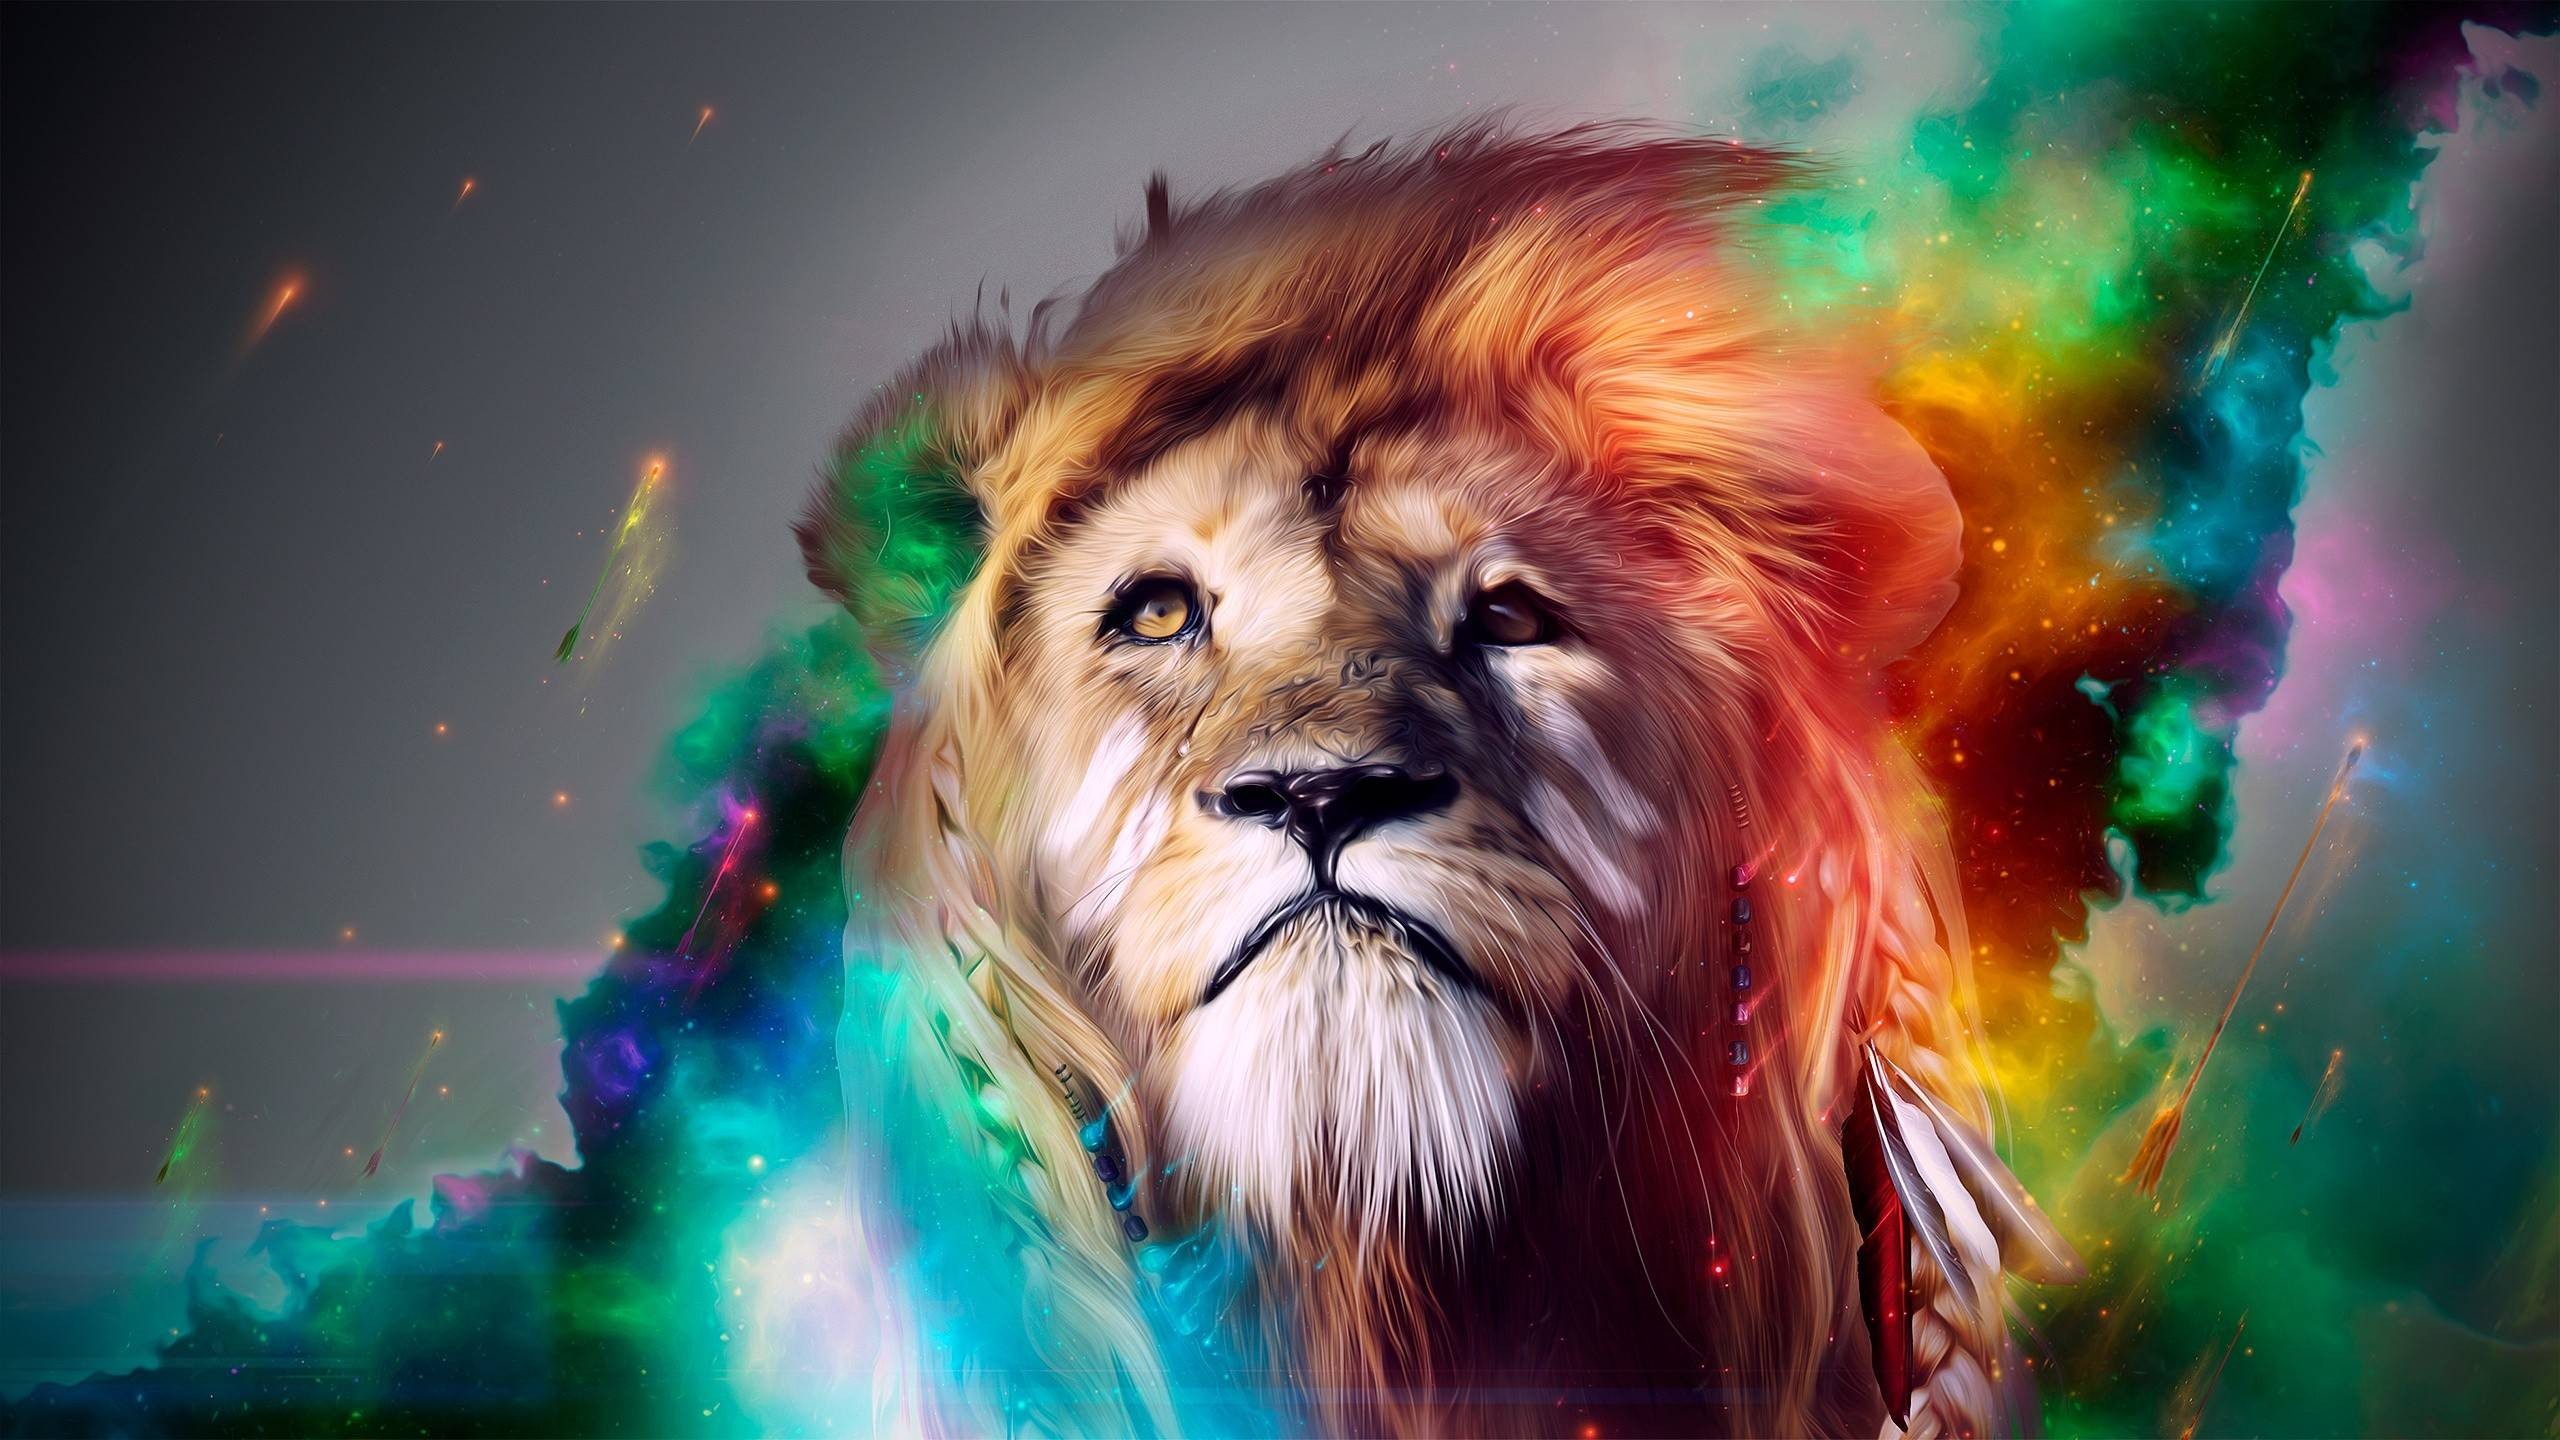 Most Awesome Wallpaper Ever-717gn23 - Lion On Indian Flag - HD Wallpaper 